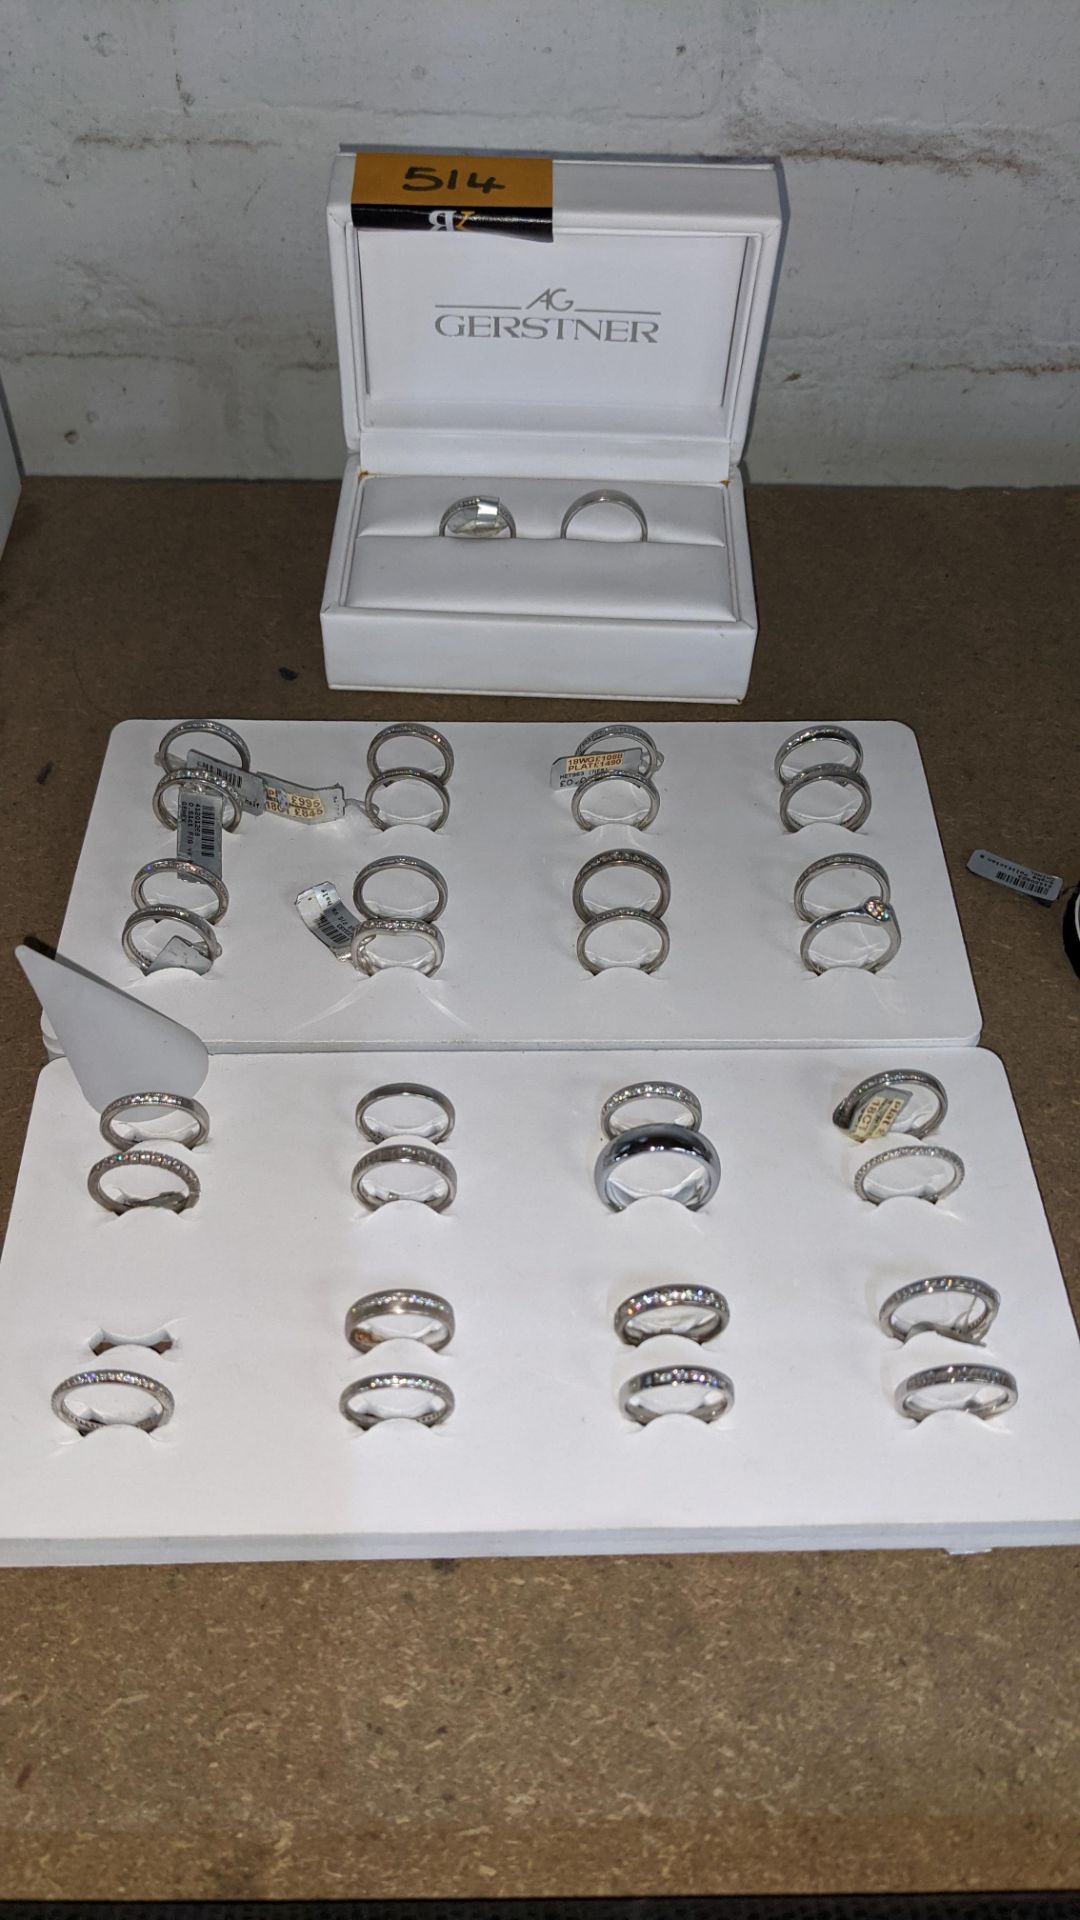 3 trays & their contents comprising approx. 33 rings, mostly in the style of eternity rings - these